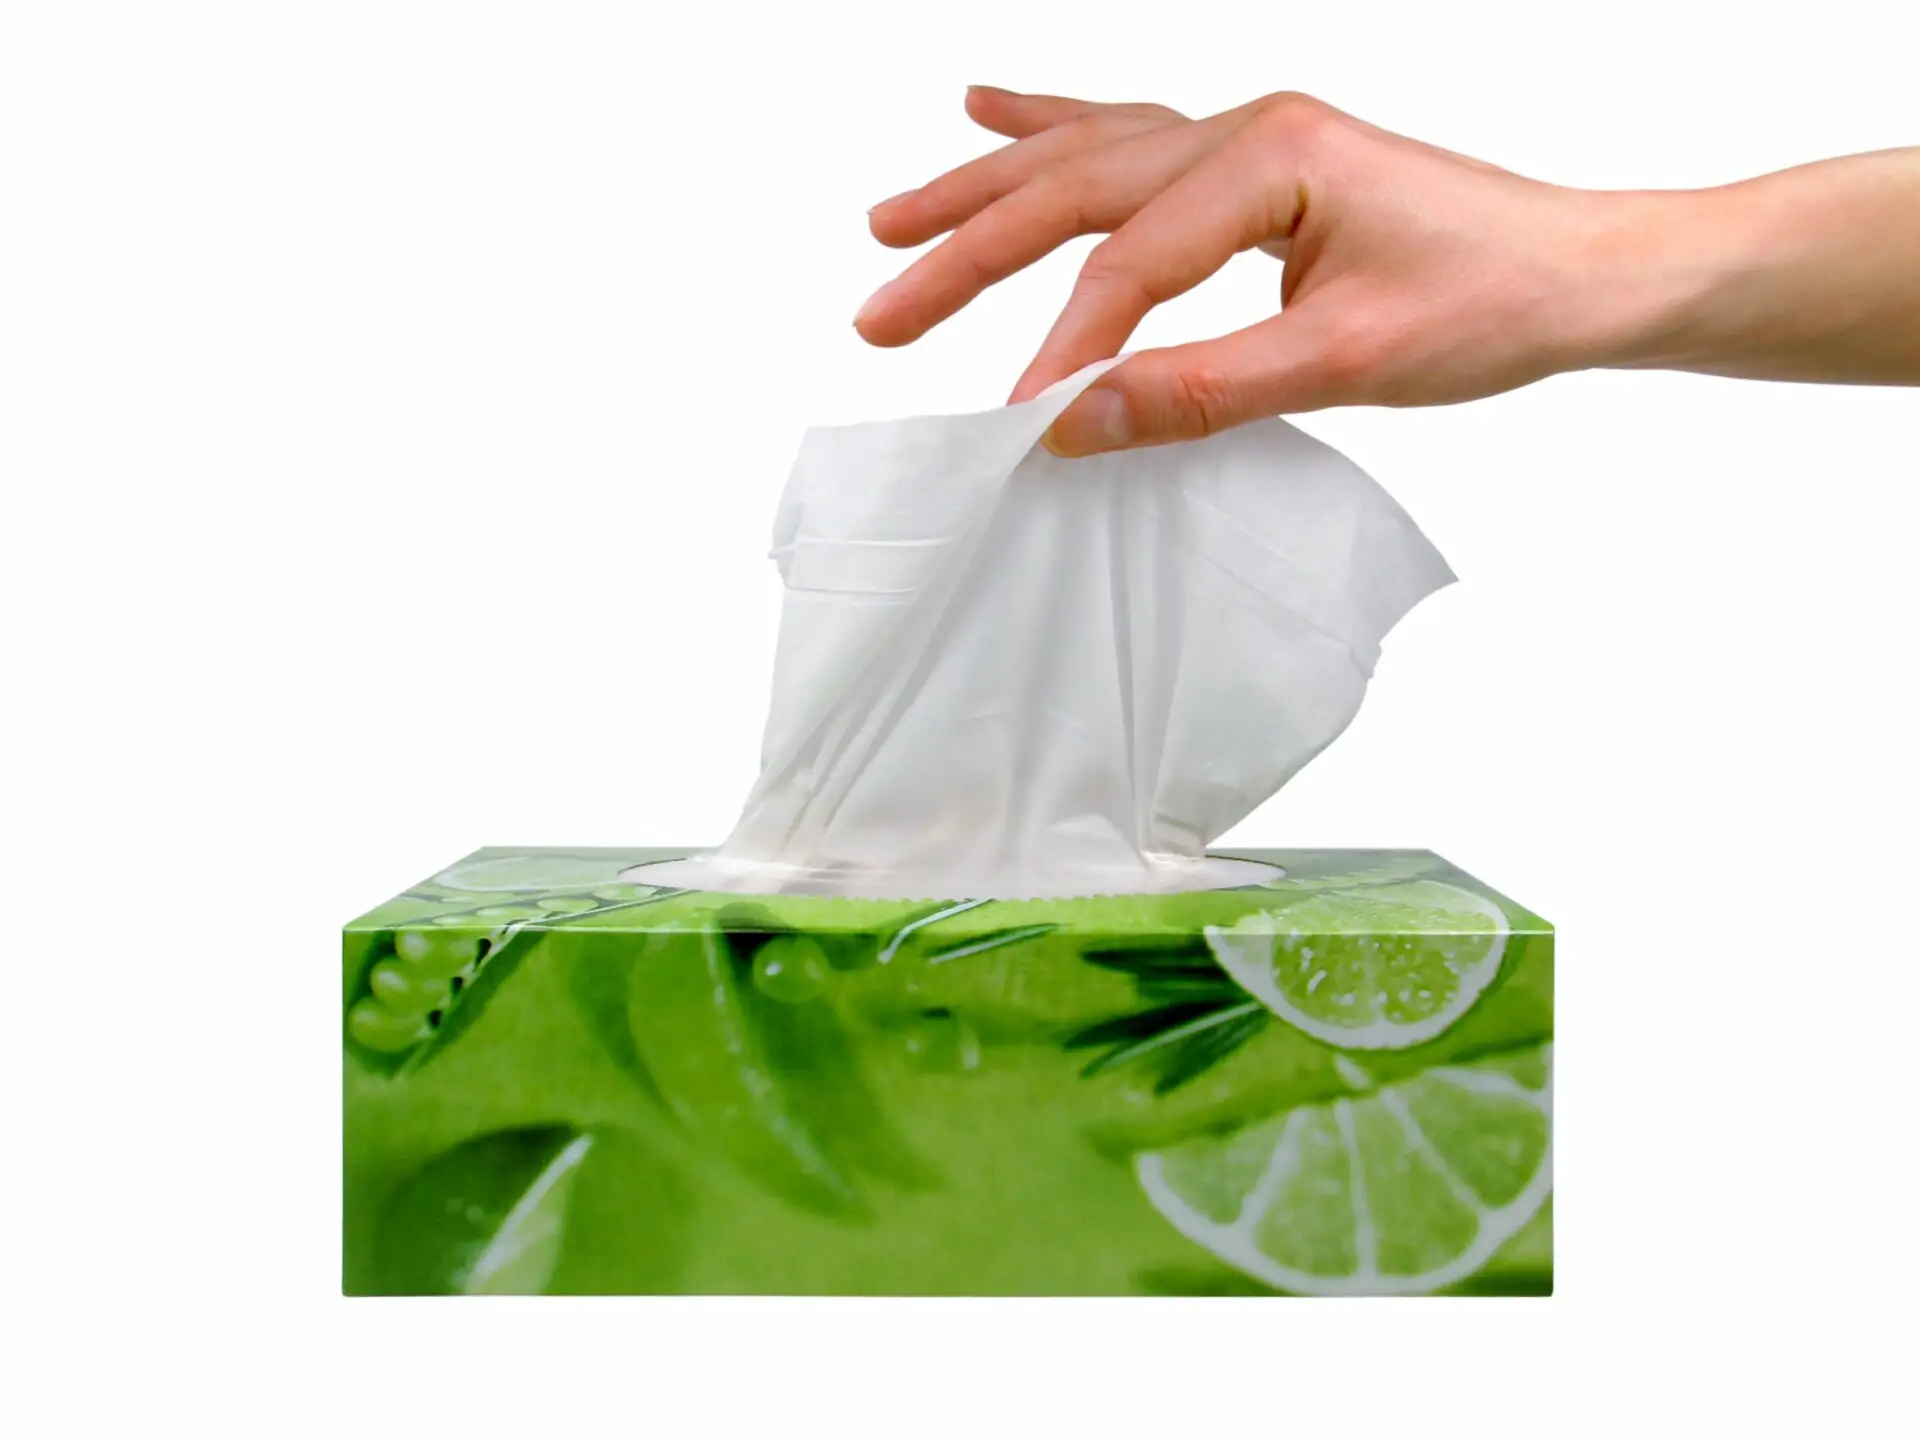 Are Tissues Eco-Friendly